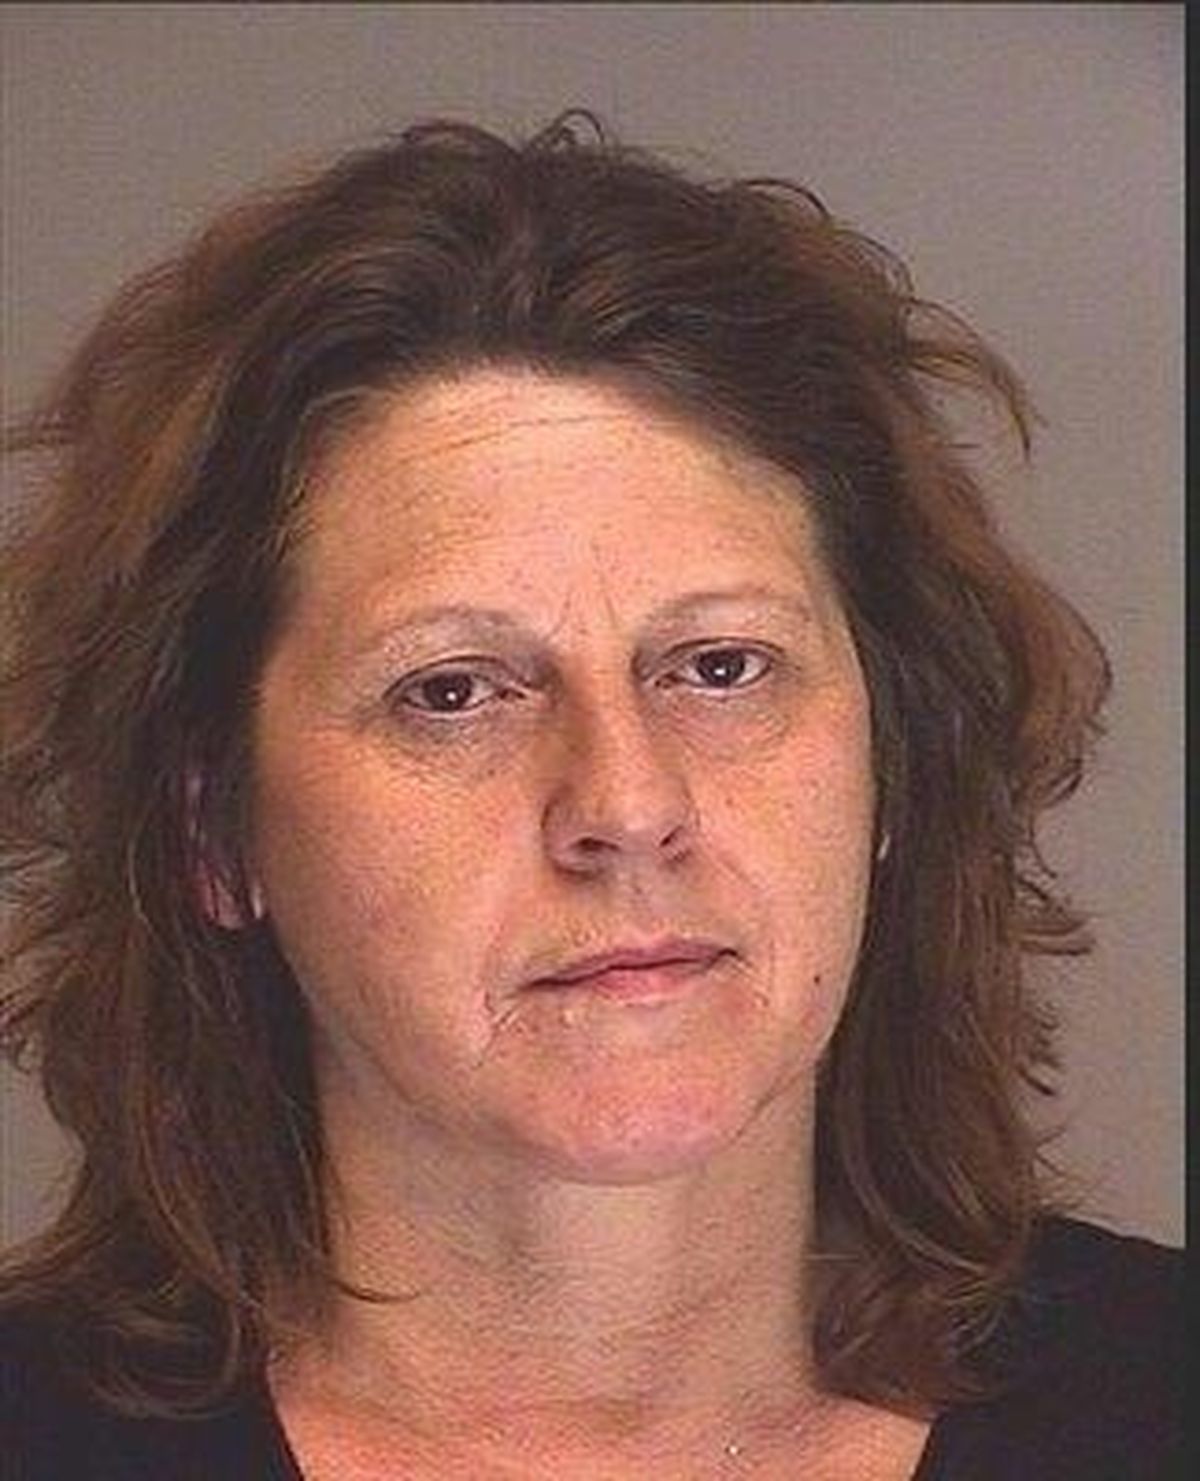 REPEAT OFFENDER: Tami Jo Hearn, AKA Tami Jo Raider, is a 51-year-old female wanted for failing to report to jail to serve her sentence for attempted first degree theft. She is 5-foot-4-inches, 185 pounds and has red hair and brown eyes.  Hearn’s last address given was in the 2000 block of W. Broadway in Spokane. She has a 29-year-old local criminal history, including convictions for second-degree possession of a stolen vehicle, first-degree theft, second-degree theft, forgery, second-degree possession of a stolen credit card, possession of a controlled substance and second-degree identity theft. (Crime Stoppers)